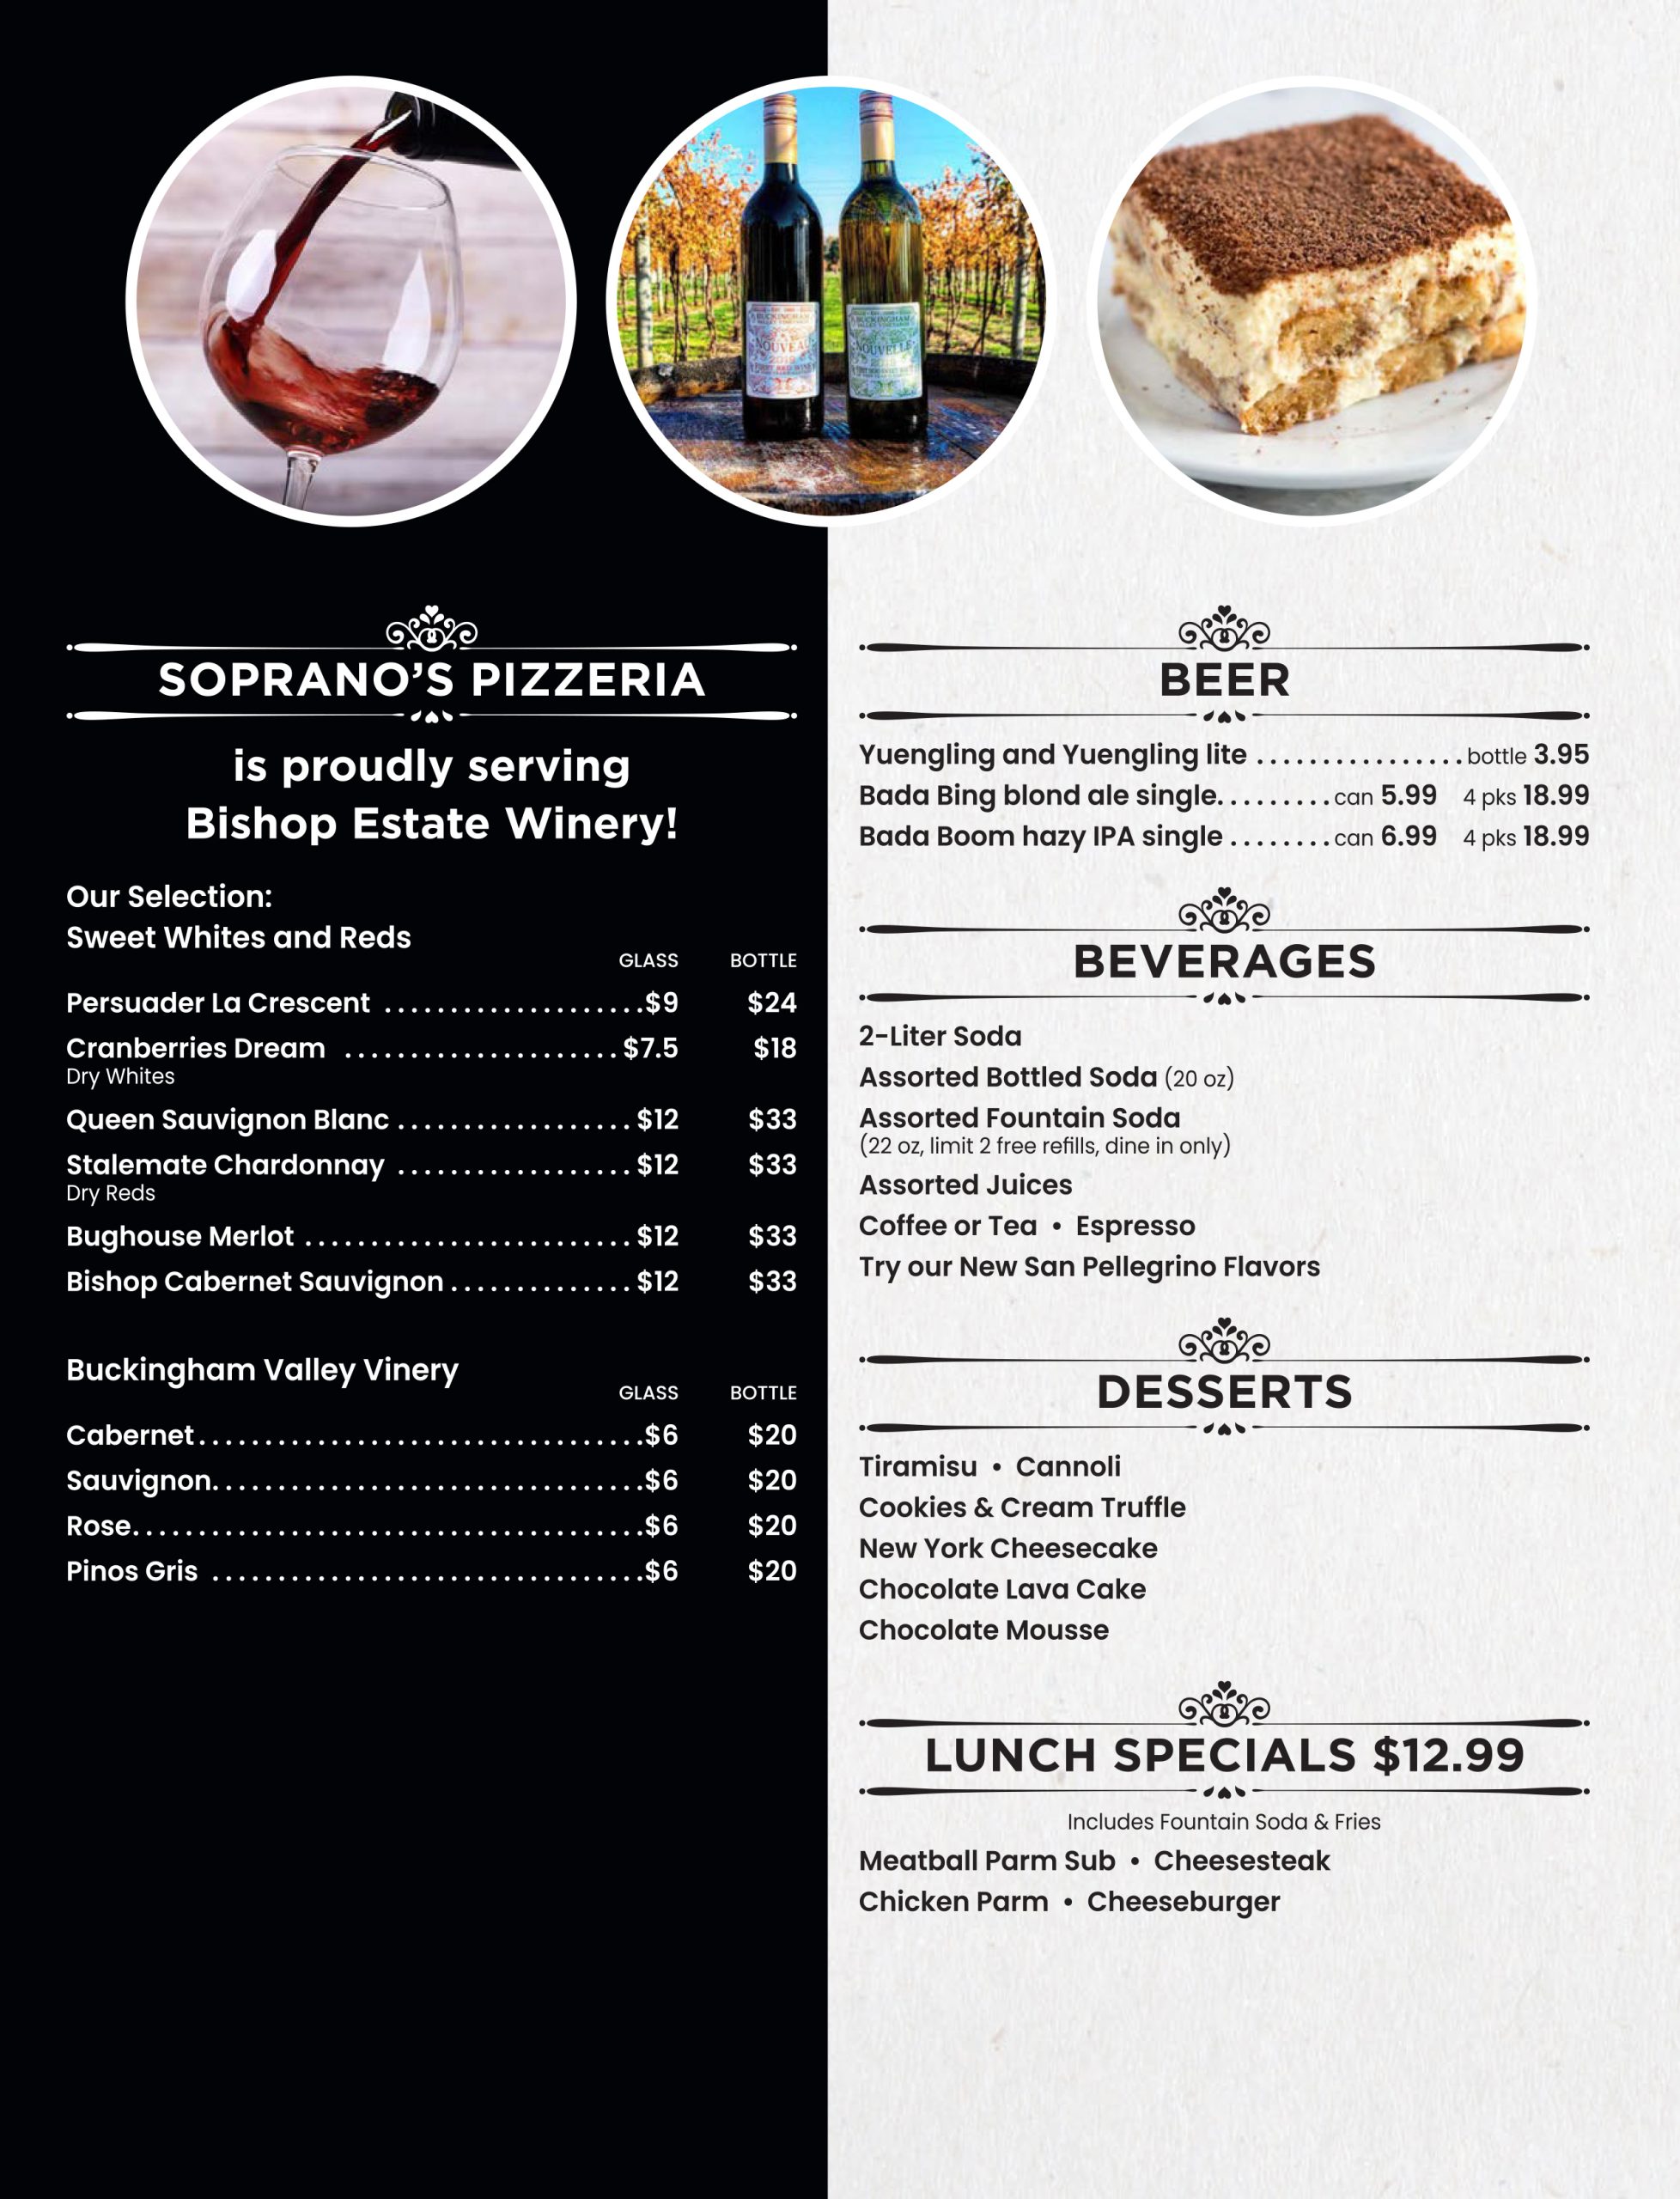 Menu page featuring selections from soprano's pizzeria and estate winery, including wine, beer, soft drinks, and desserts, with a lunch special at the bottom.